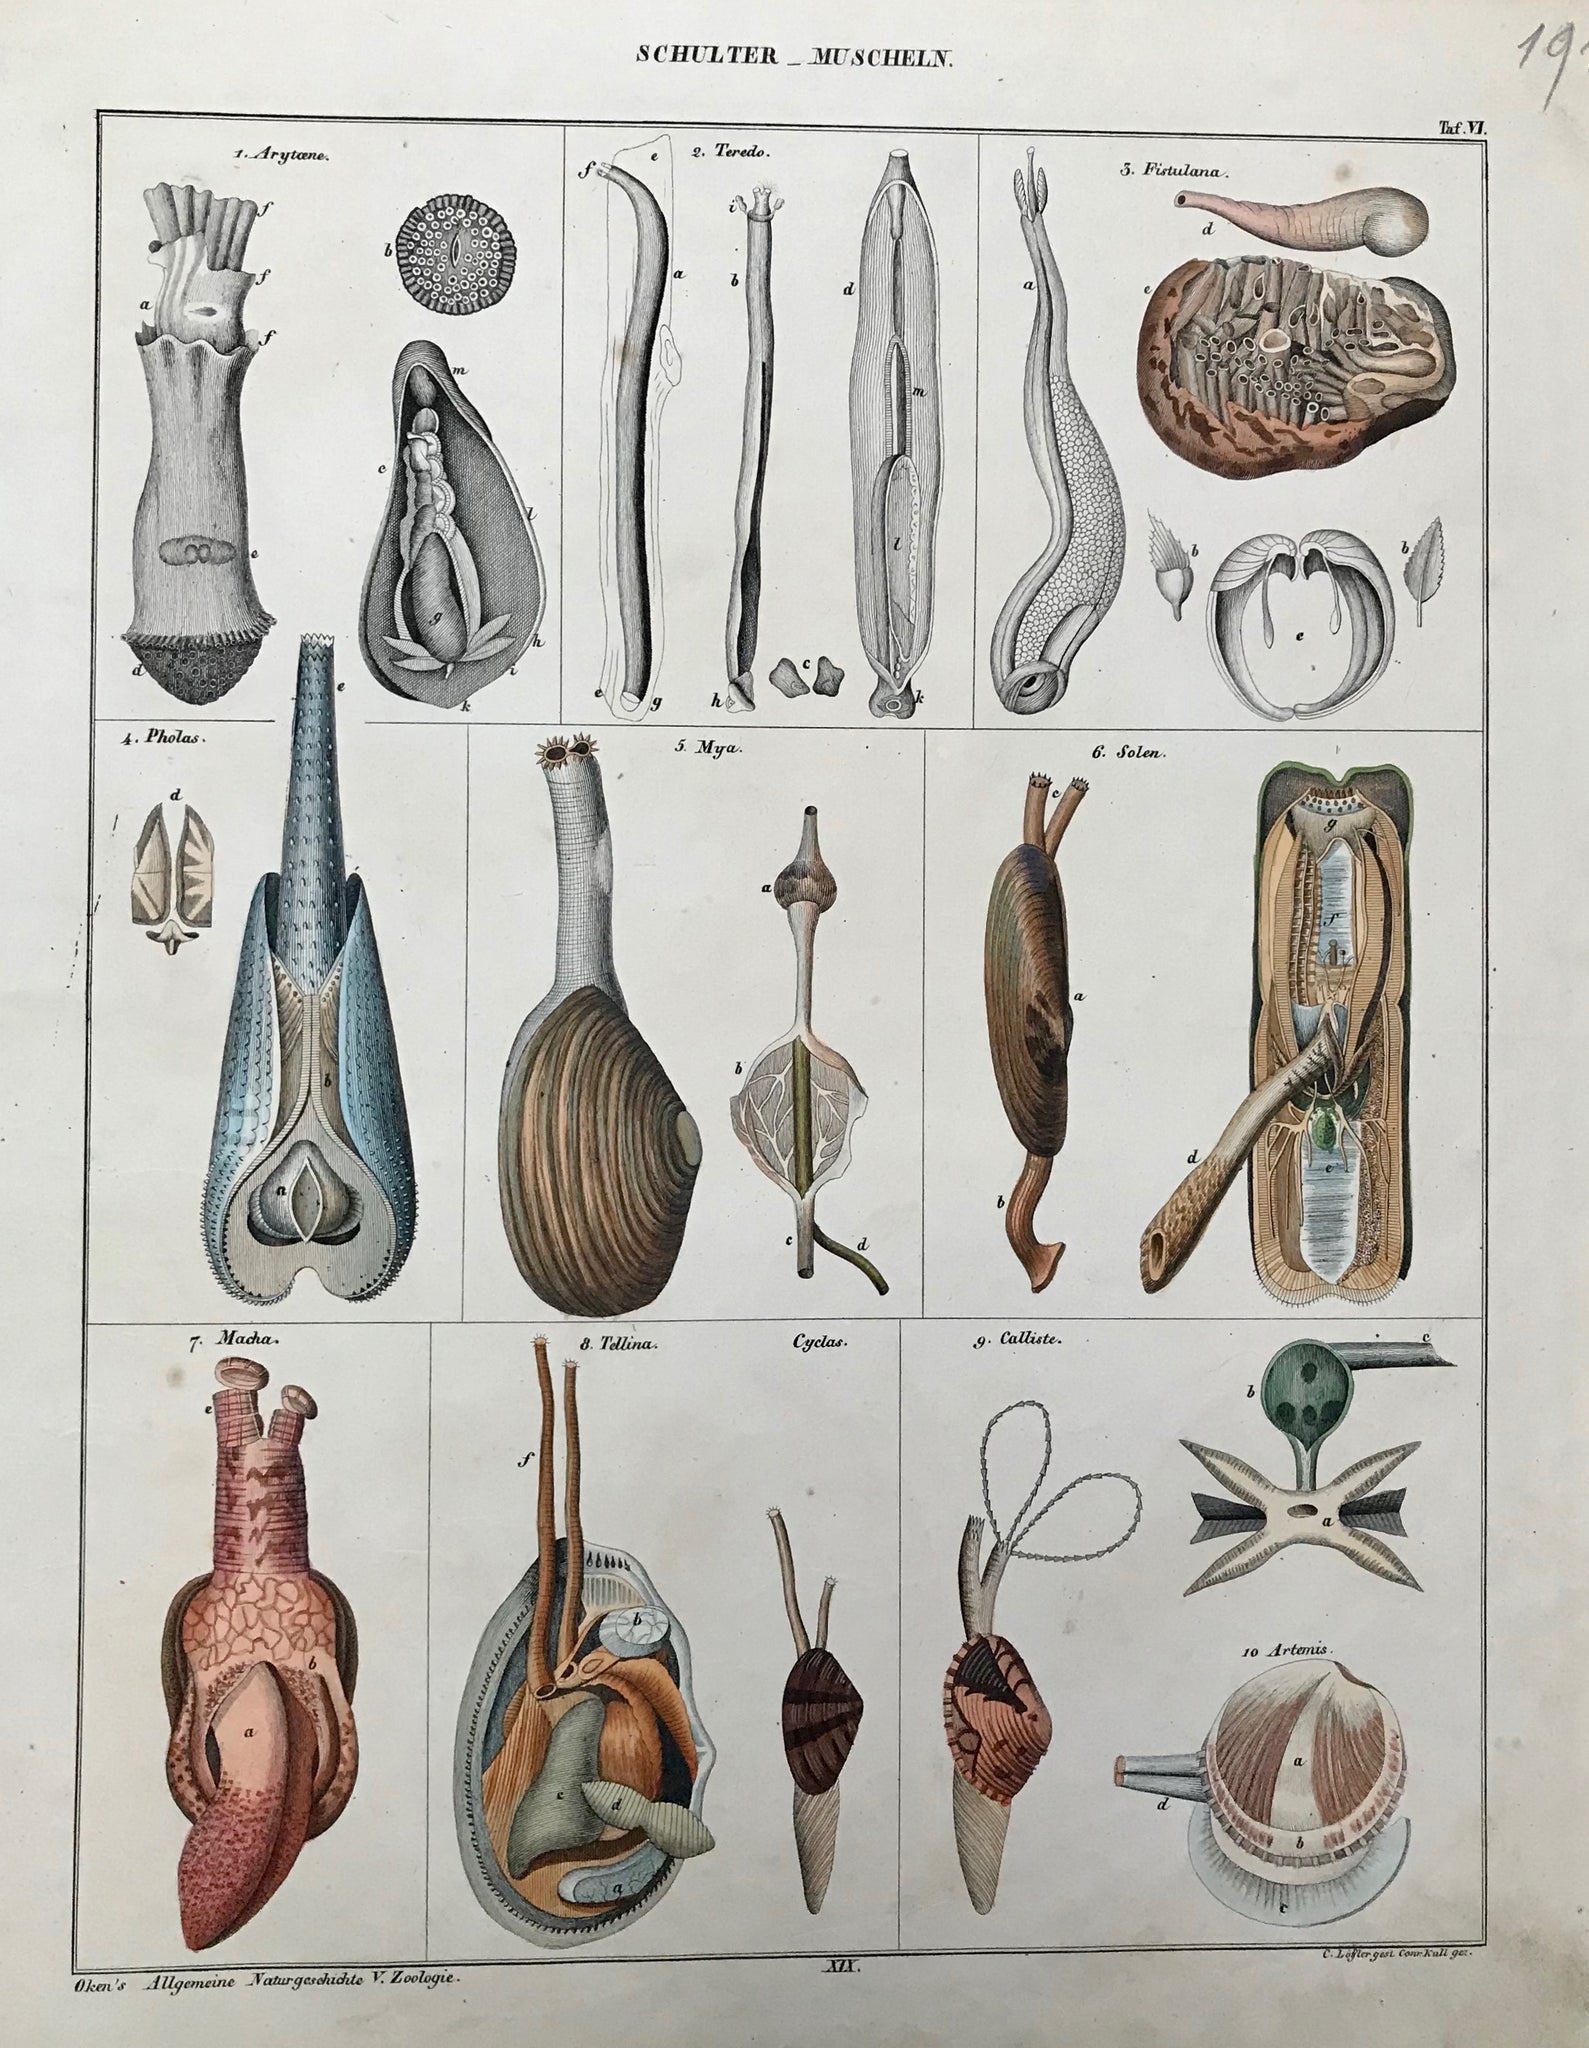 Schulter - Muschelen  Lithograph by C. Schach after Conr. Kull, ca 1840 from "Oken's Allgemeine Naturgeschichte". Original hand coloring. Print has asmall spot on left margin and some light smudging in margins.